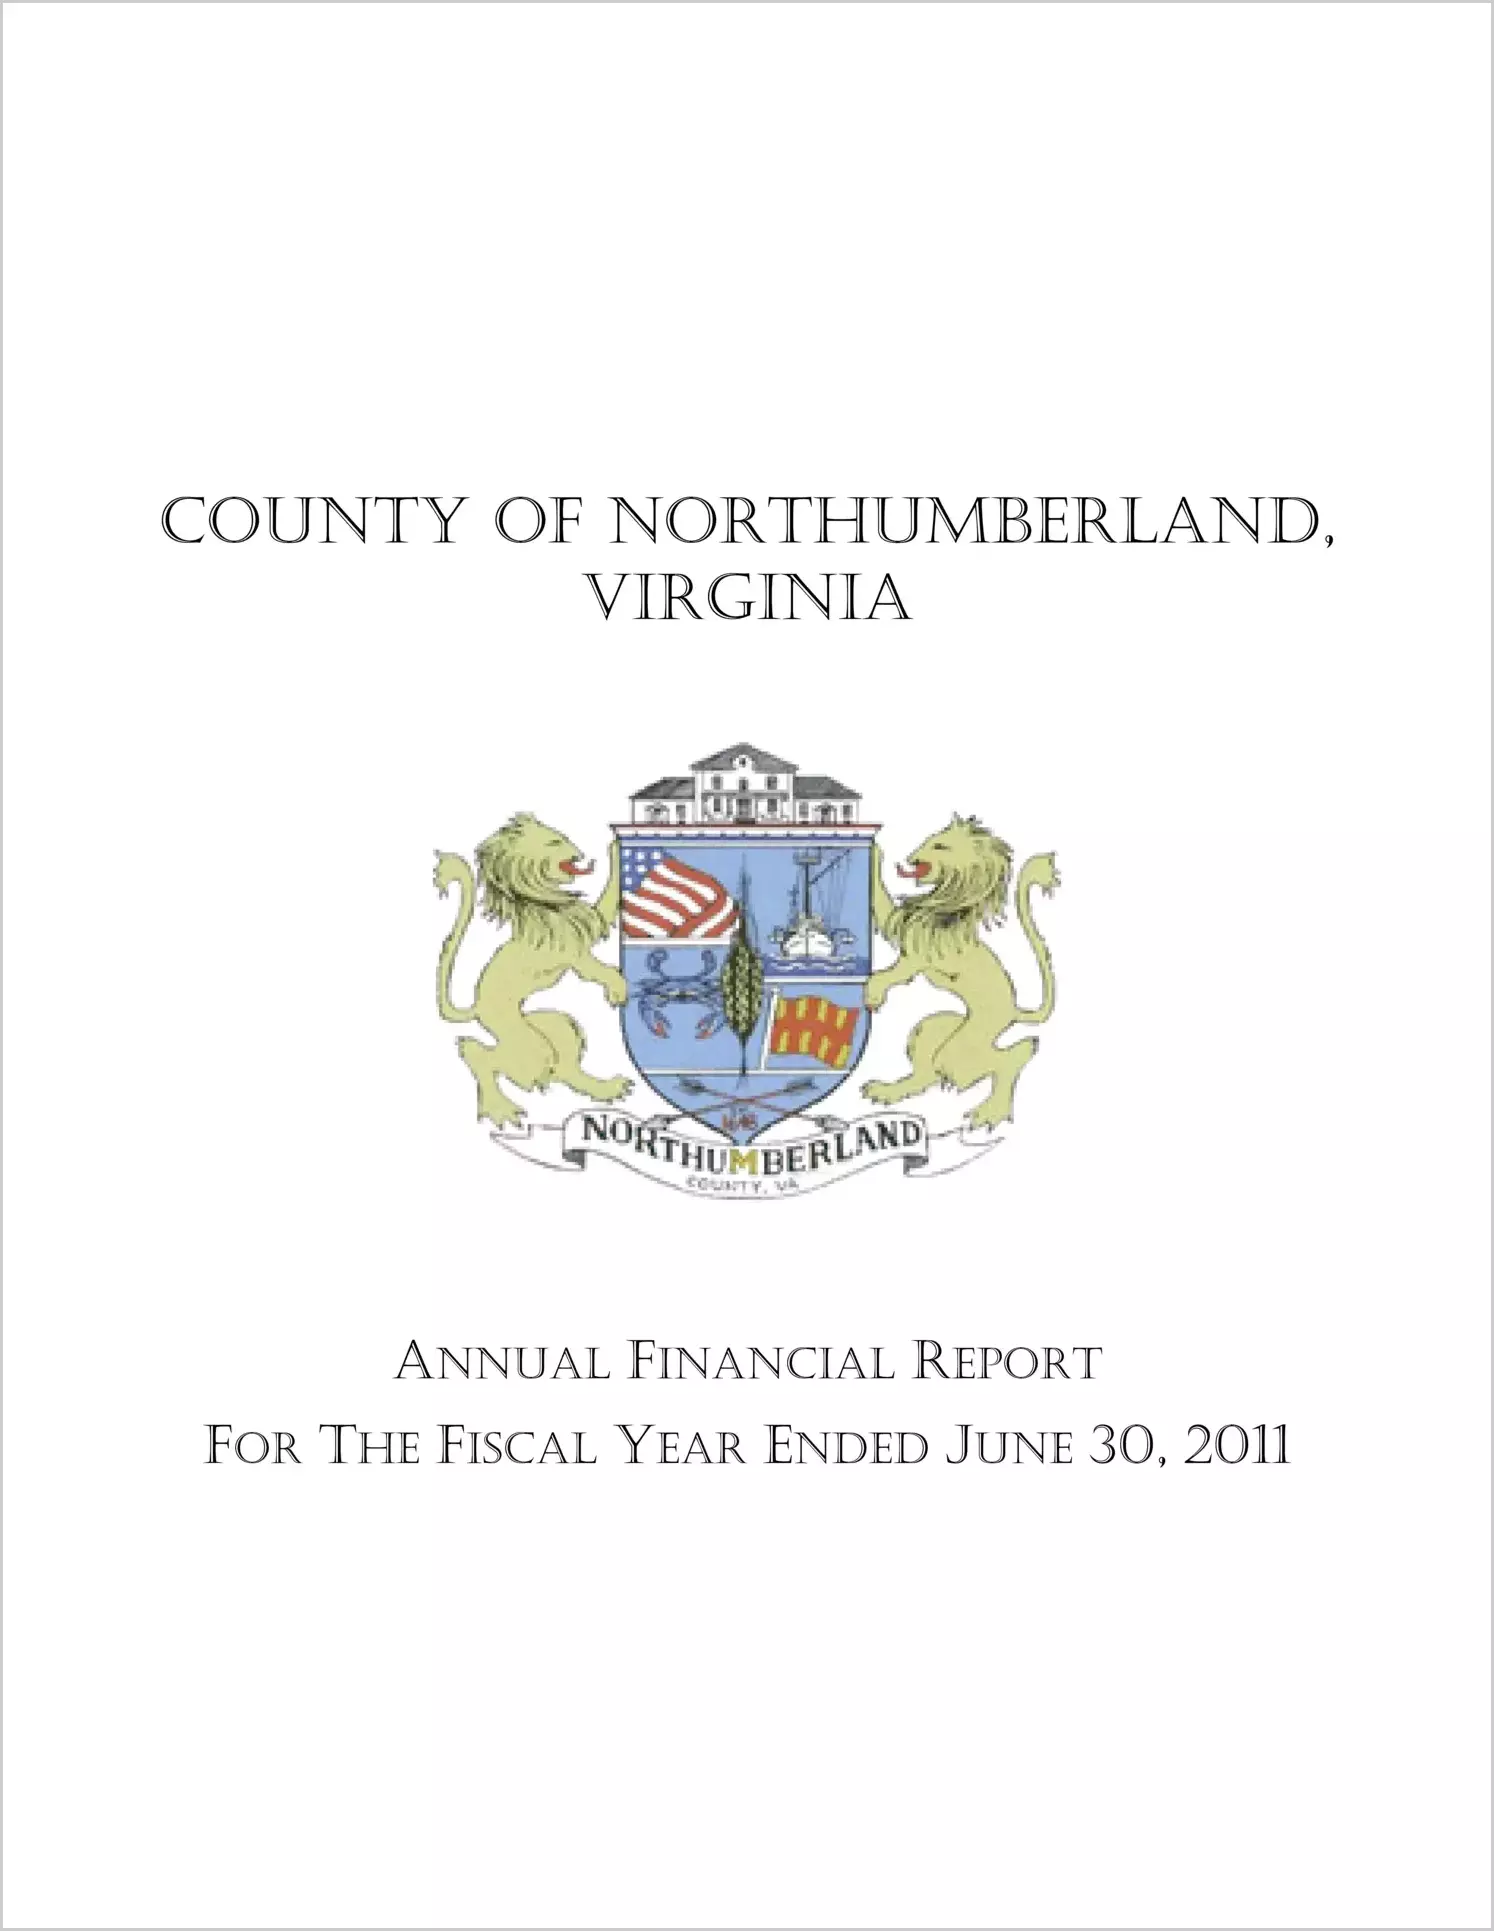 2011 Annual Financial Report for County of Northumberland